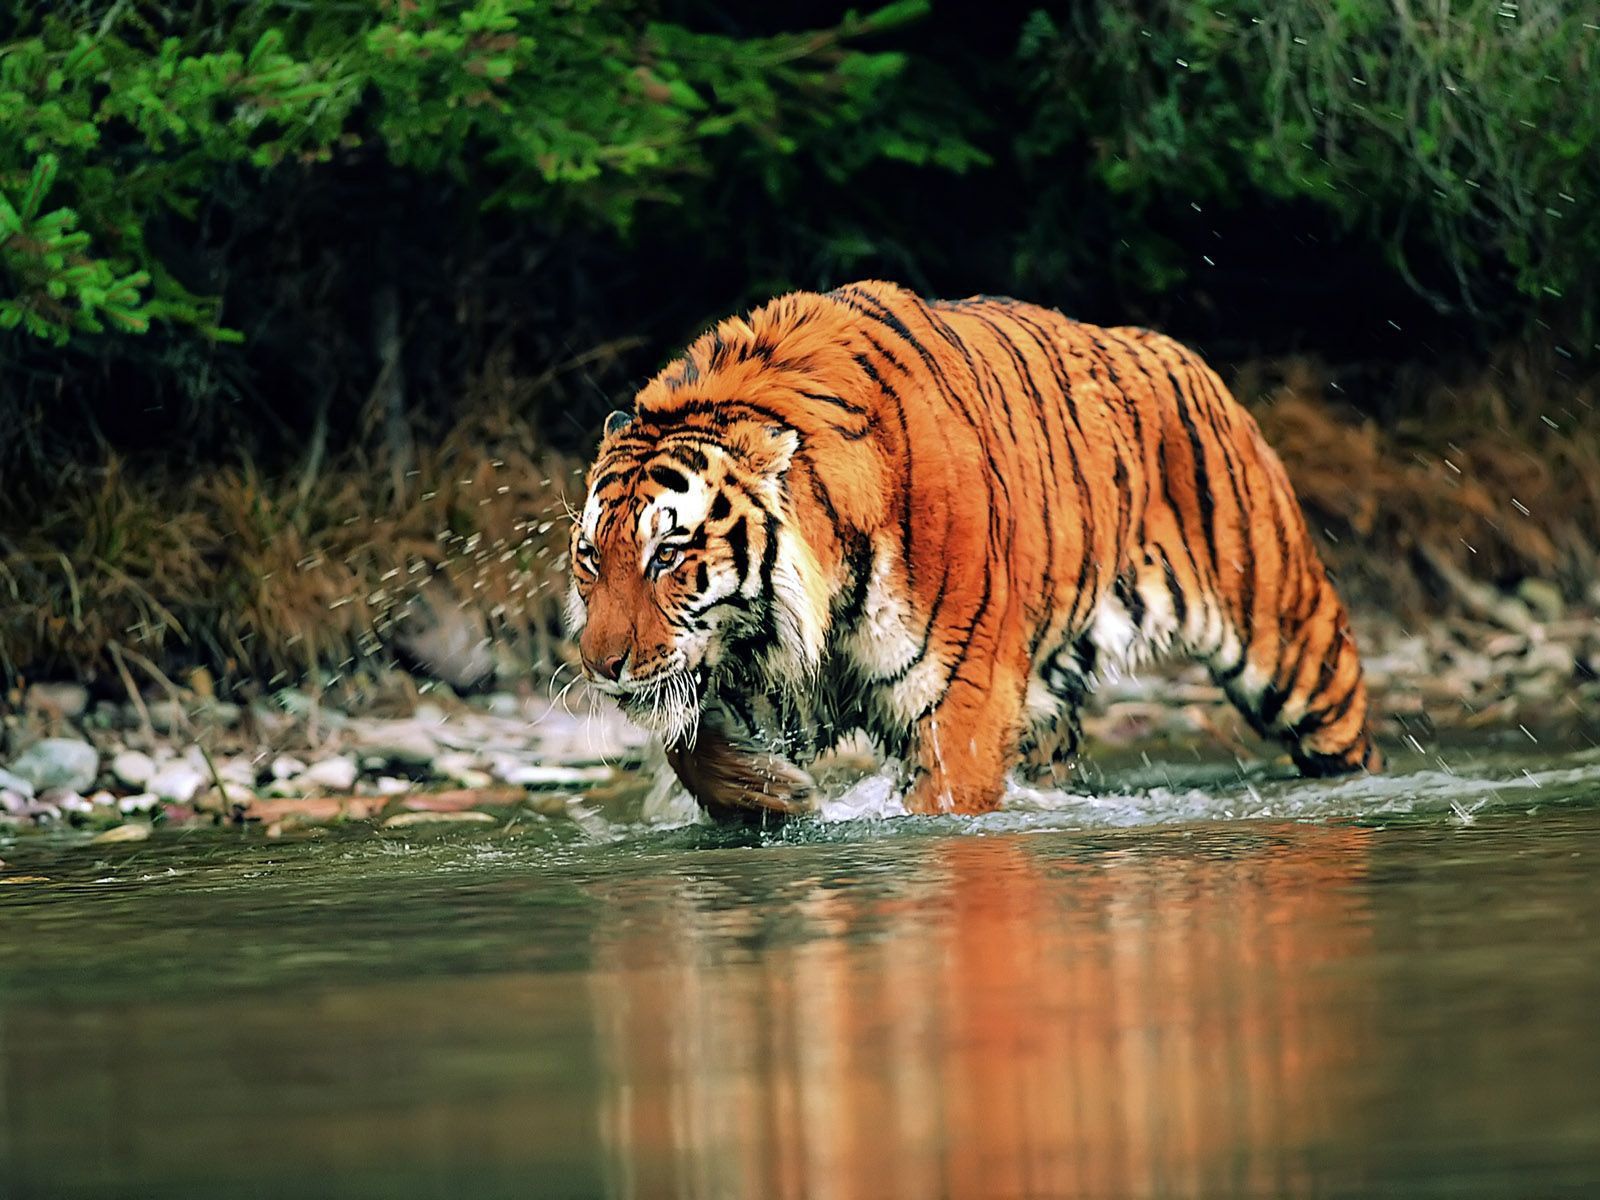 Tiger Wallpaper In Hd - HD Wallpapers Lovely